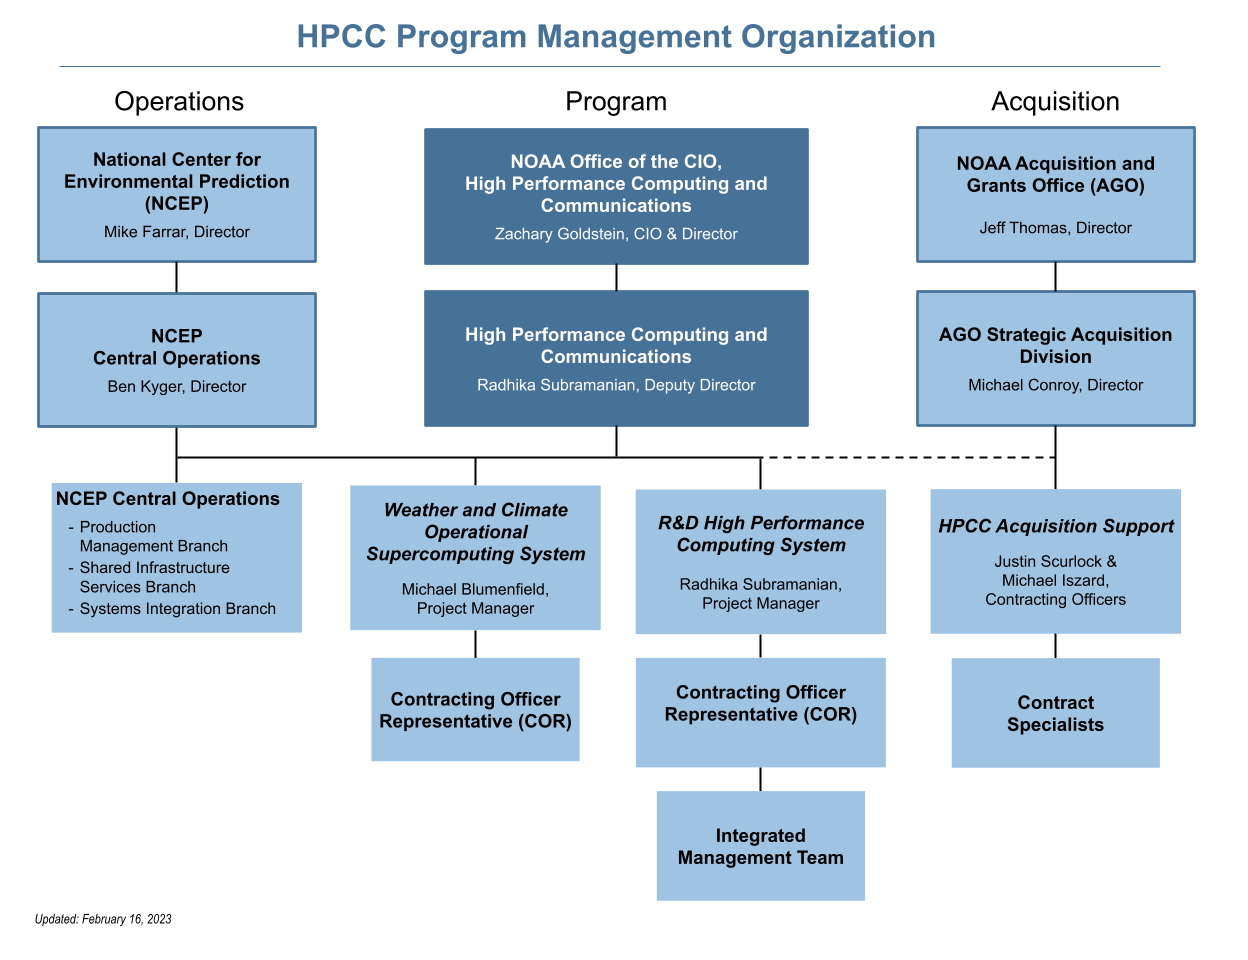 NOAA High Performance Computing and Communications organization chart - updated: April 14, 2020Three initial divisions, Operations: William Lapenta, Director, NCEL, Ben Kyger, Director, NCEP Central Operations; NCEP Central Operations - Production Management Branch, Shared Infrastructure Services Branch, Systems Integration Branch. Program, Zachary Goldstein, NOAA CIO and Director, High Performance Computing and Communications; Frank Indiviglio, Deputy Director, Acting, High Performance Computing and